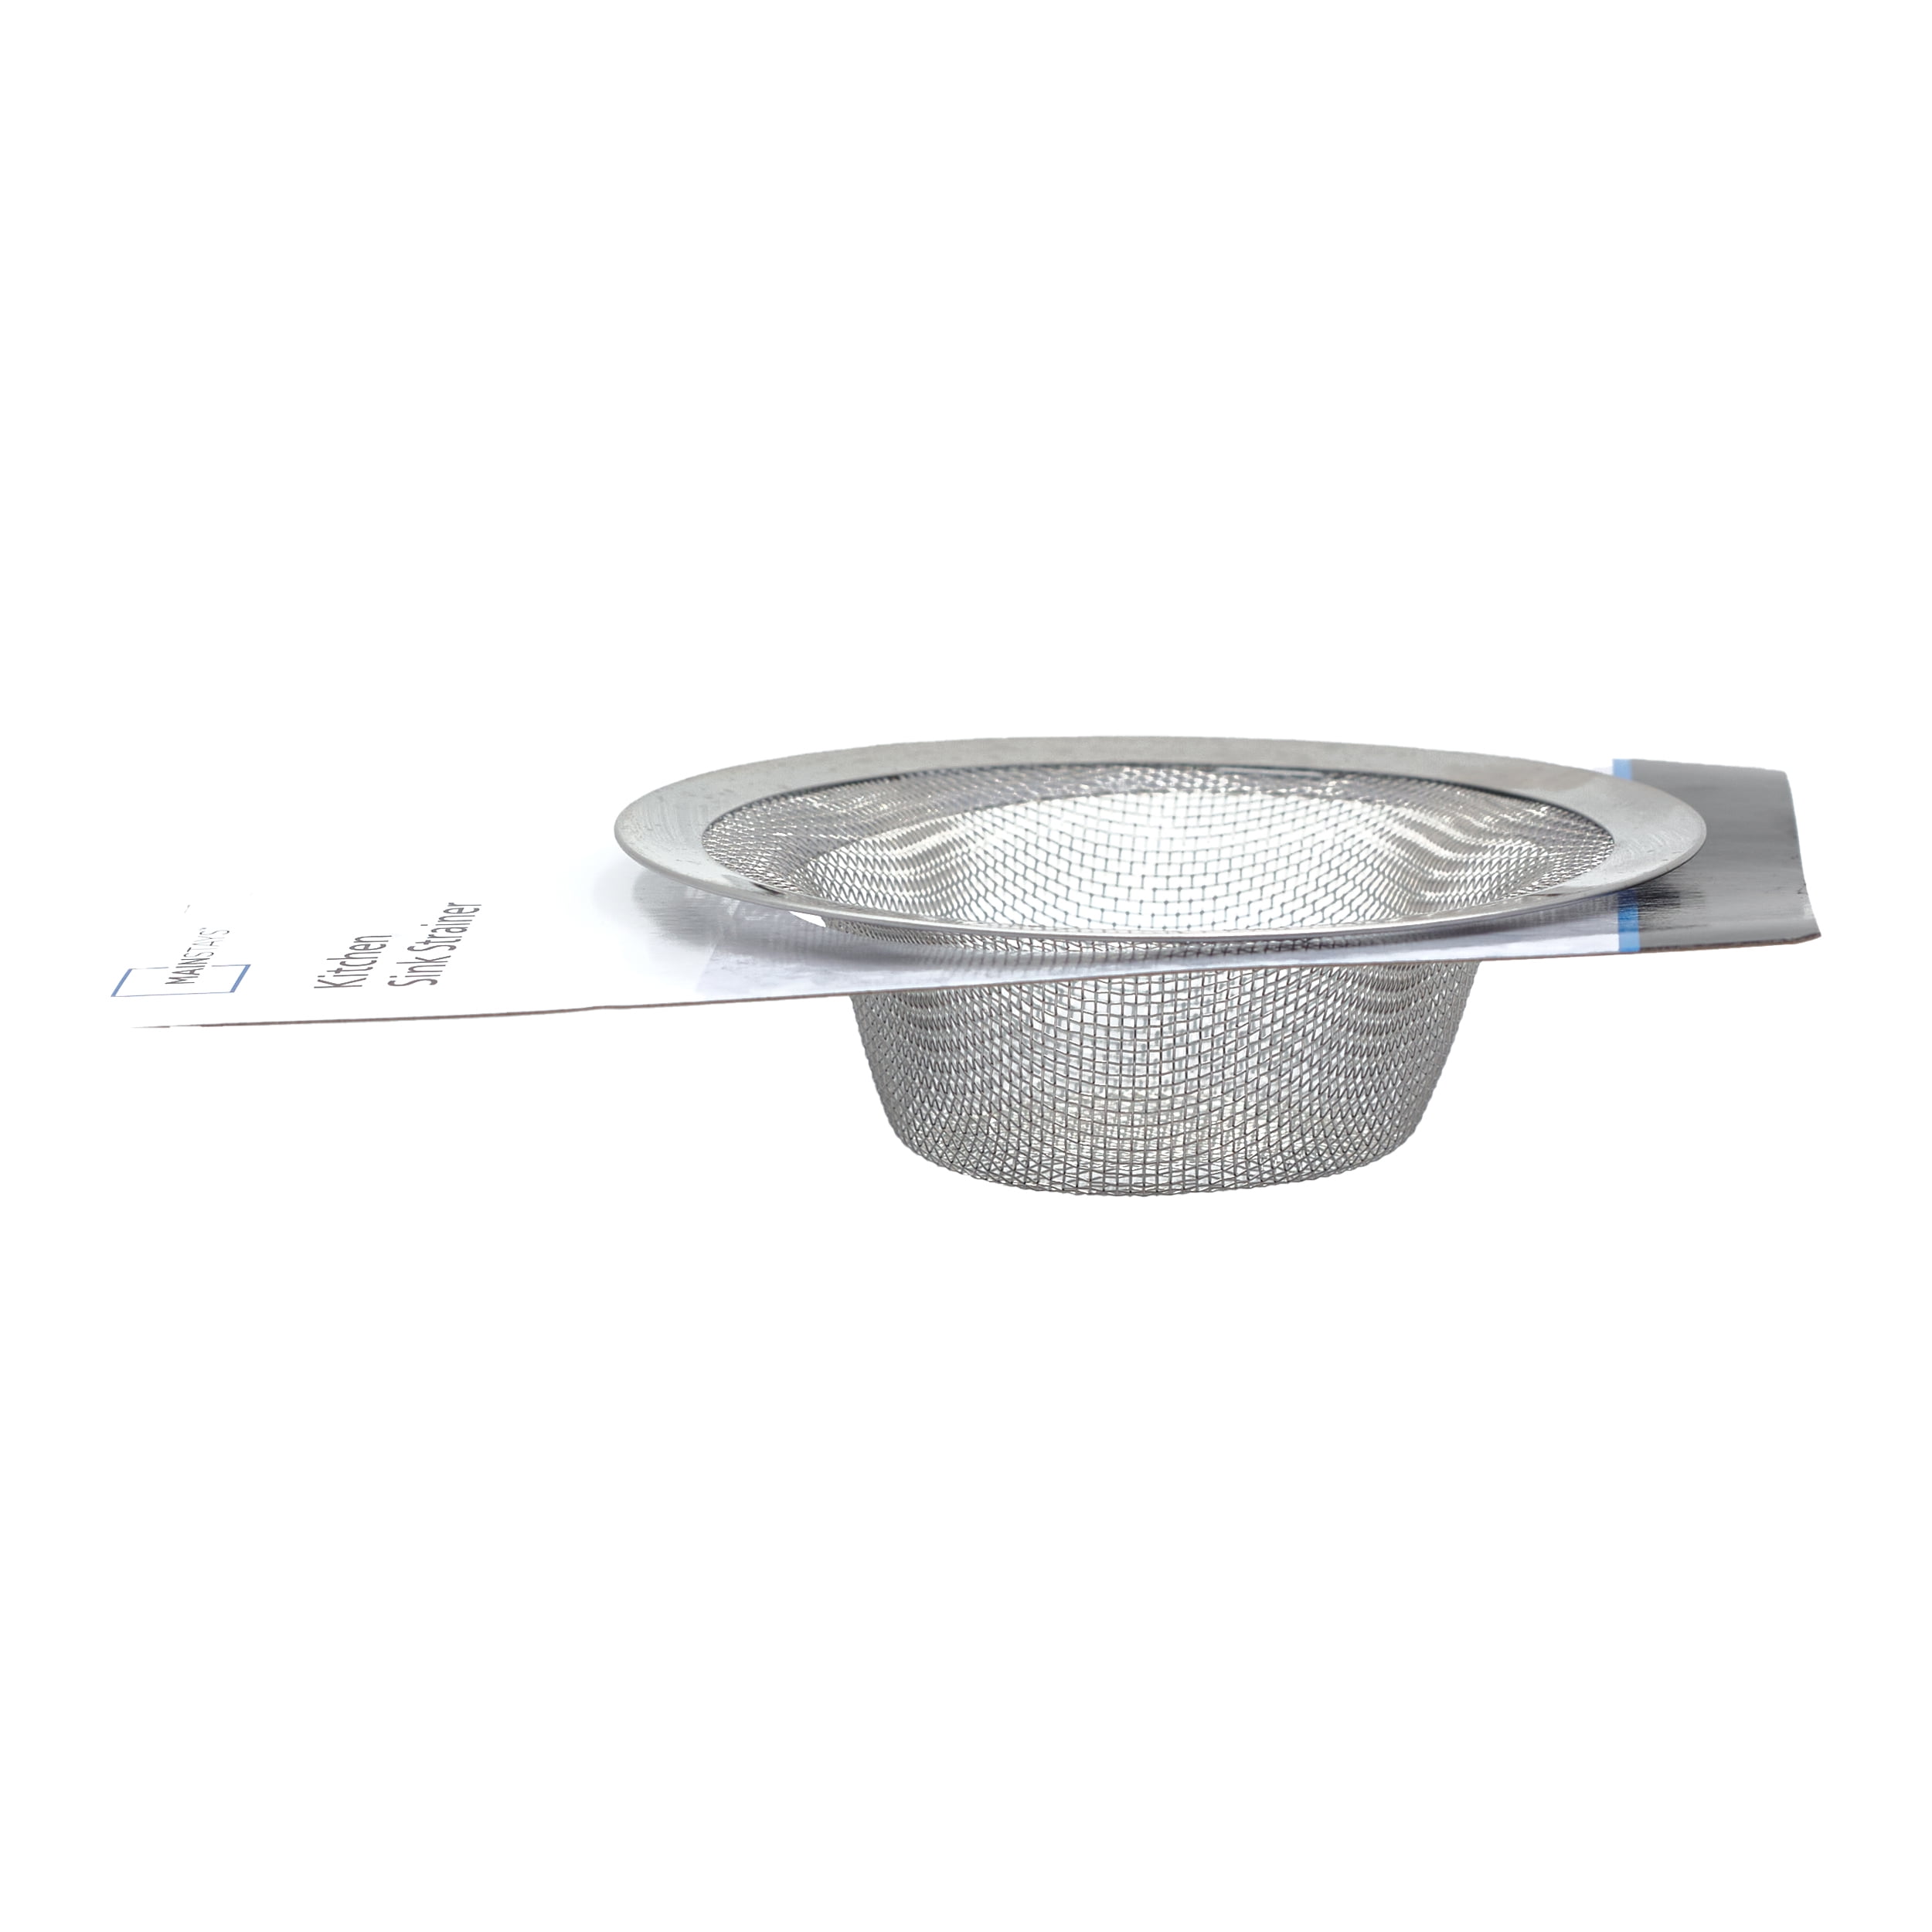 Mainstays Stainless Steel Universal Shower Strainer with Rubber Gasket - Gray - 5.75 in